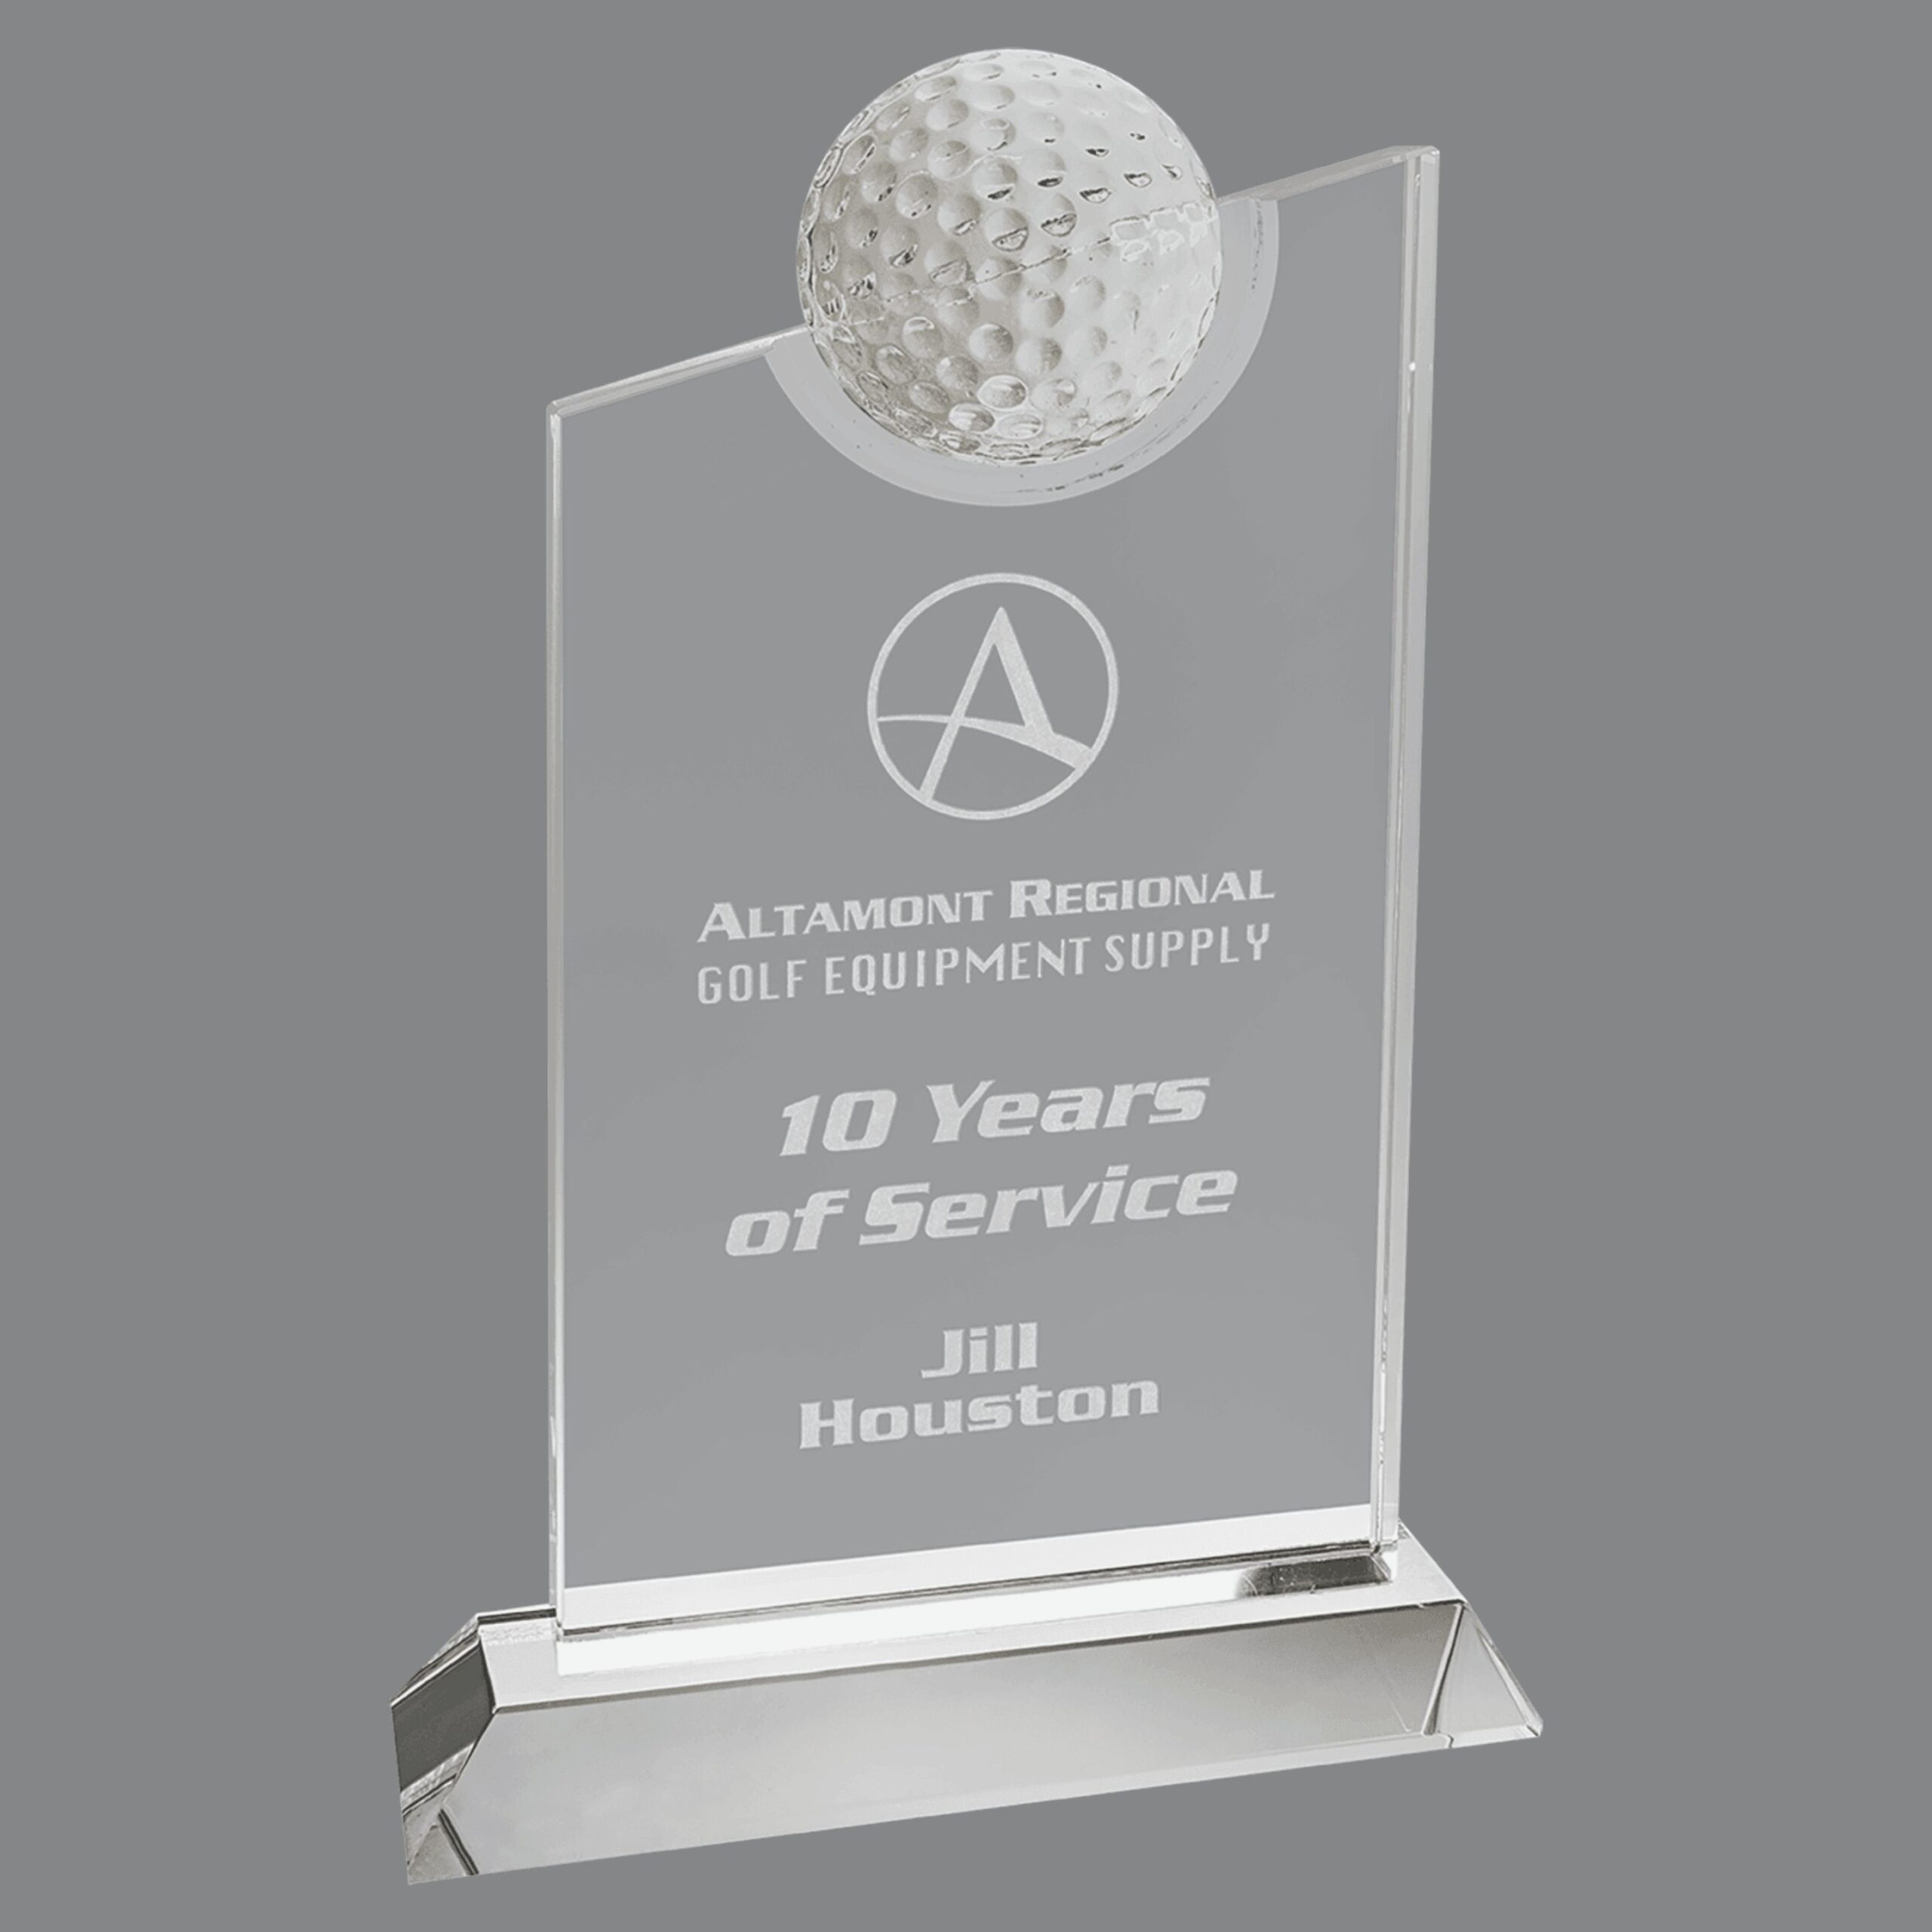 Our Slanted Golf Ball Trophy features a piece of crystal with a slant from right to left at the top. Also at the top is a 2.5" in diameter golf ball that is mounted for added golf decoration. Below is the area for engraving. This specific trophy is for Jill Houston who has 10 years of service at the Altamont Regional Golf Equipment Supply.